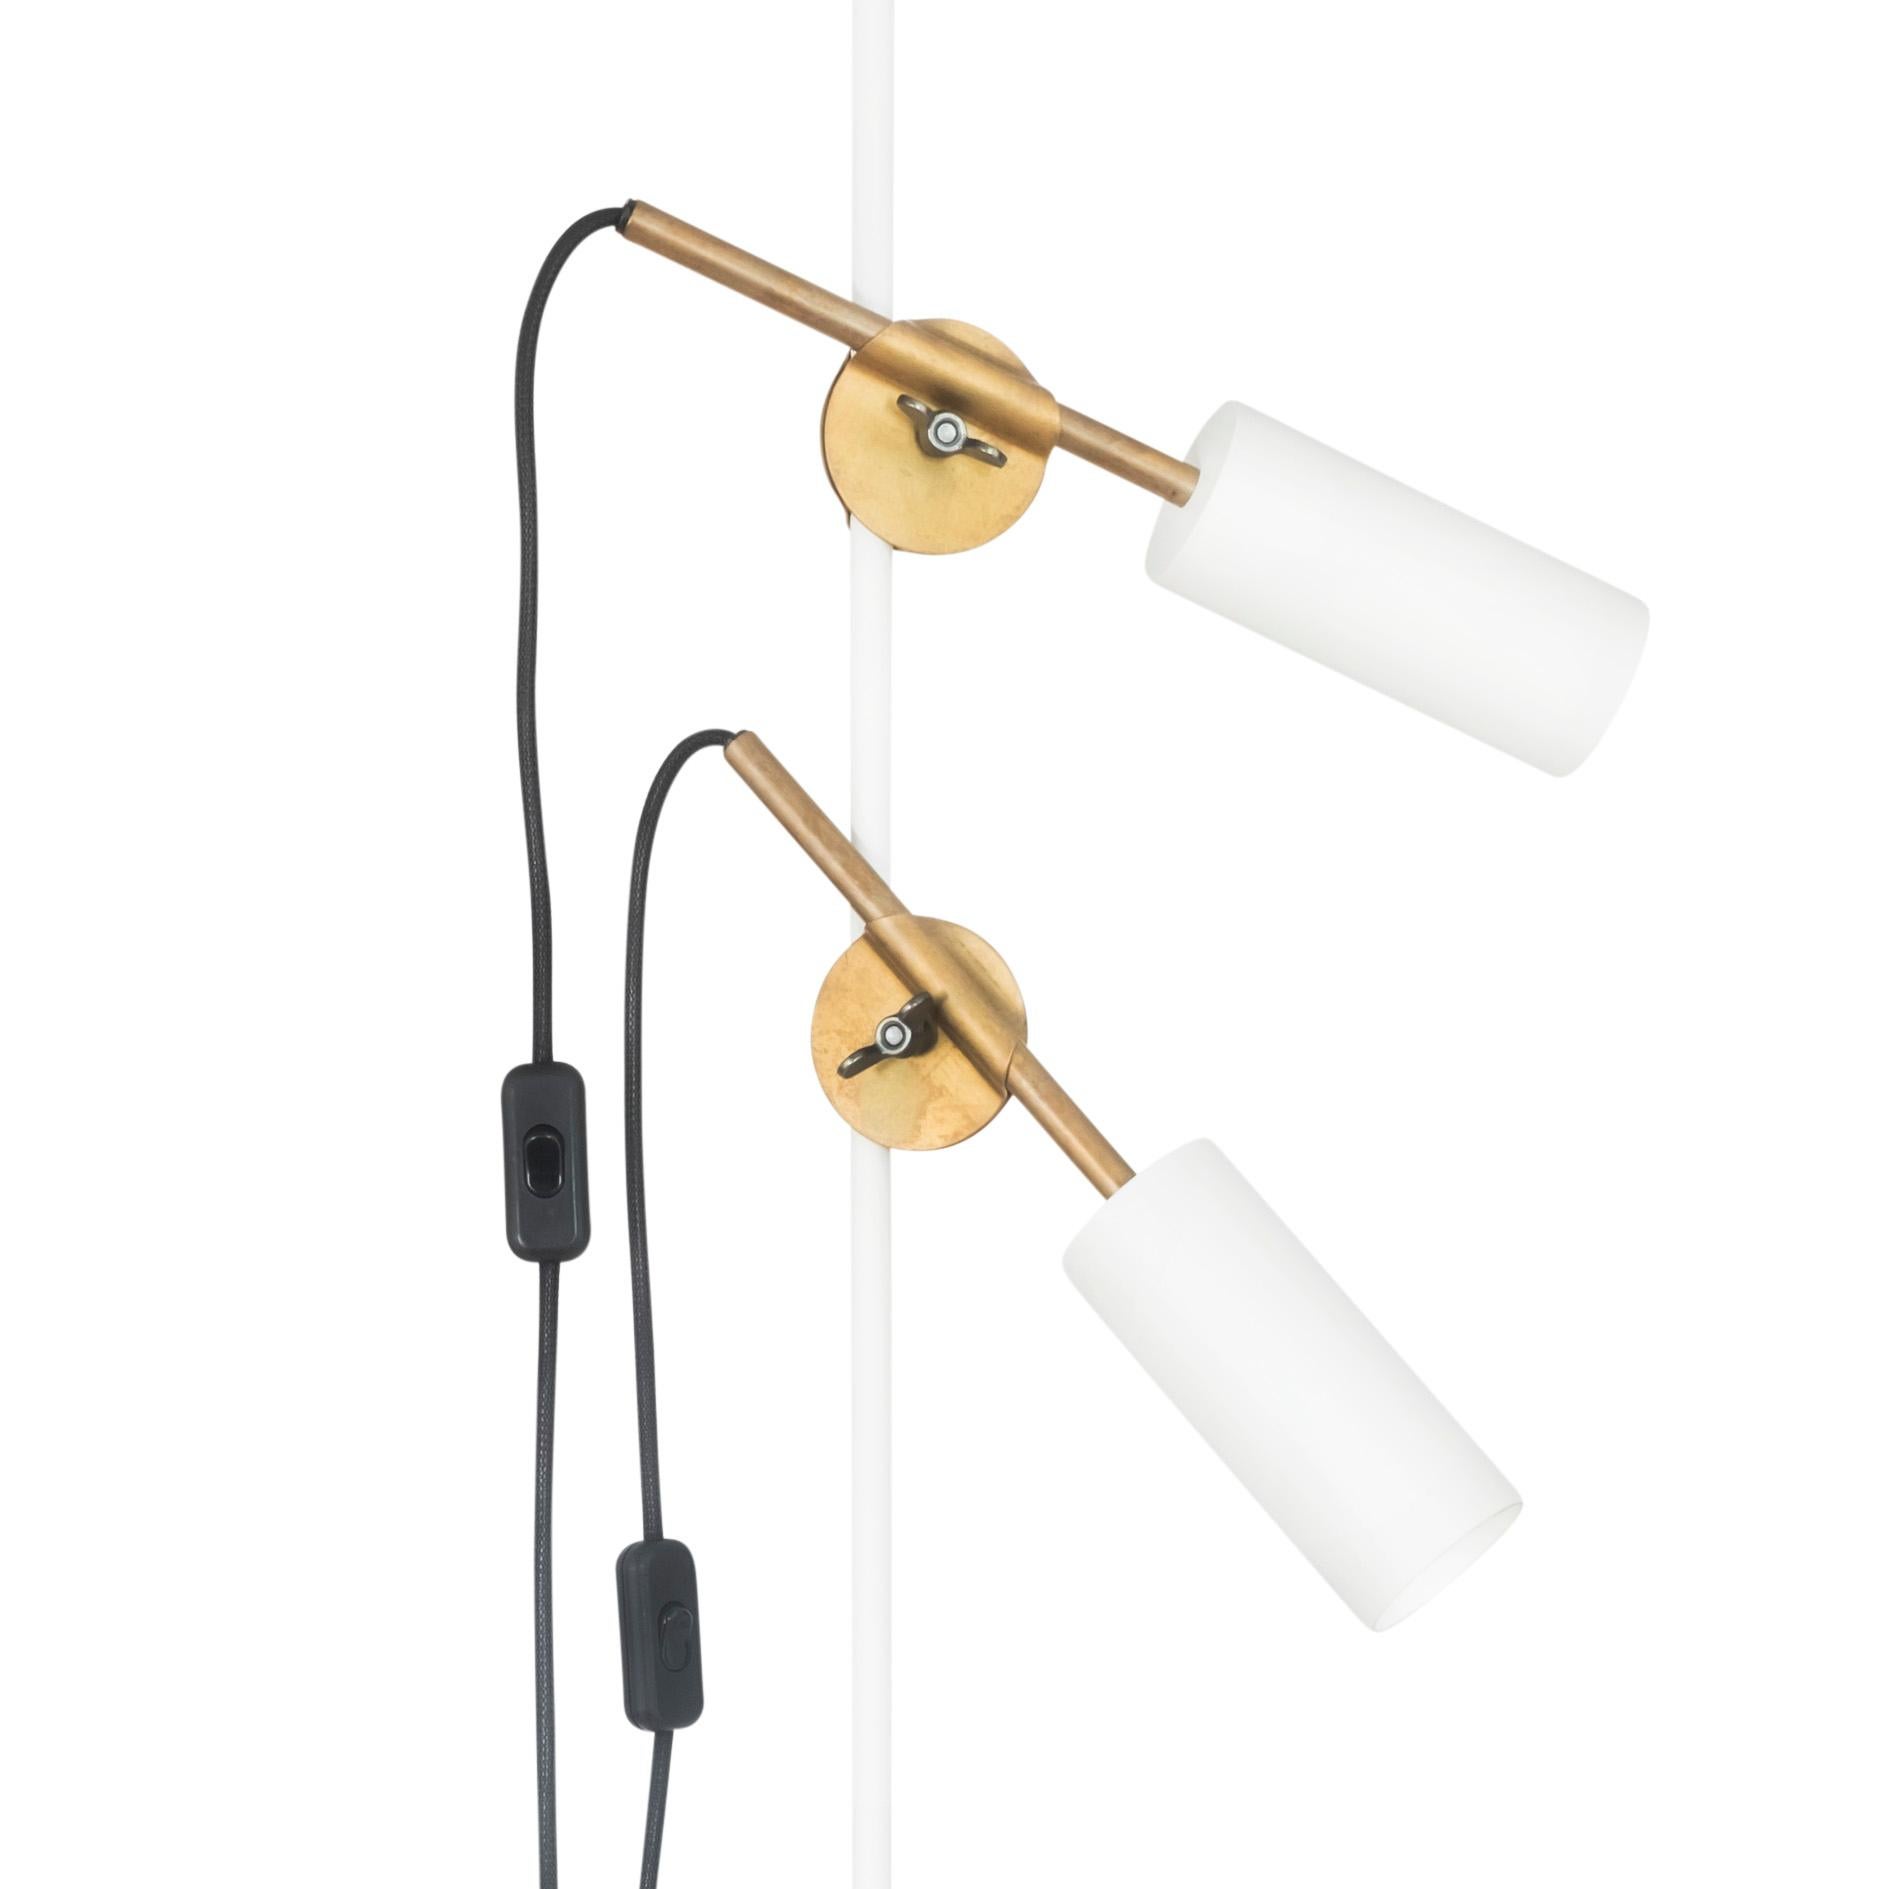 Johan Carpner STAV Two Arms Floor Lamp White Brass by Konsthantverk and manufactured by Konsthantverk.

The production of lamps, wall lights and floor lamps are manufactured using craftsman’s techniques with the same materials and techniques as the